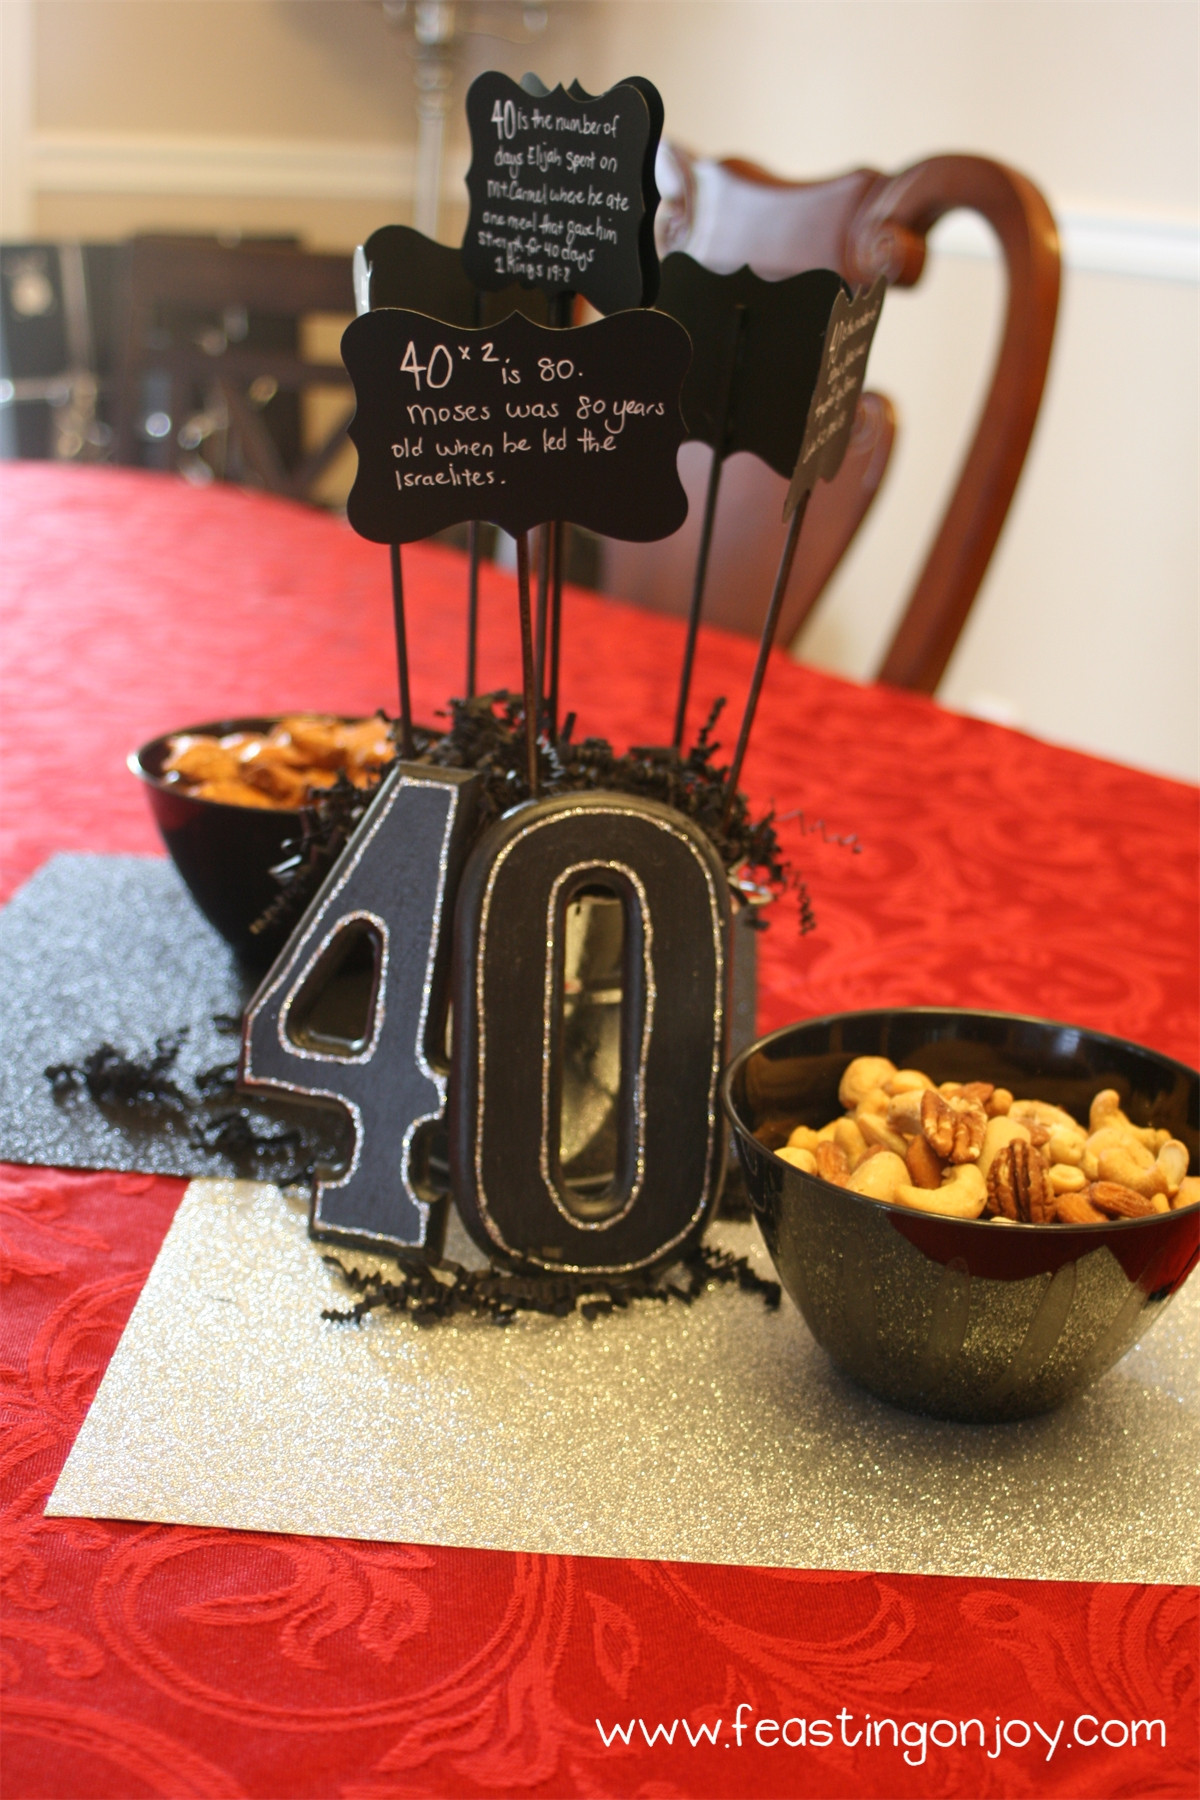 Best ideas about 40th Birthday Party
. Save or Pin A Christian Manly 40th Birthday Party free Now.